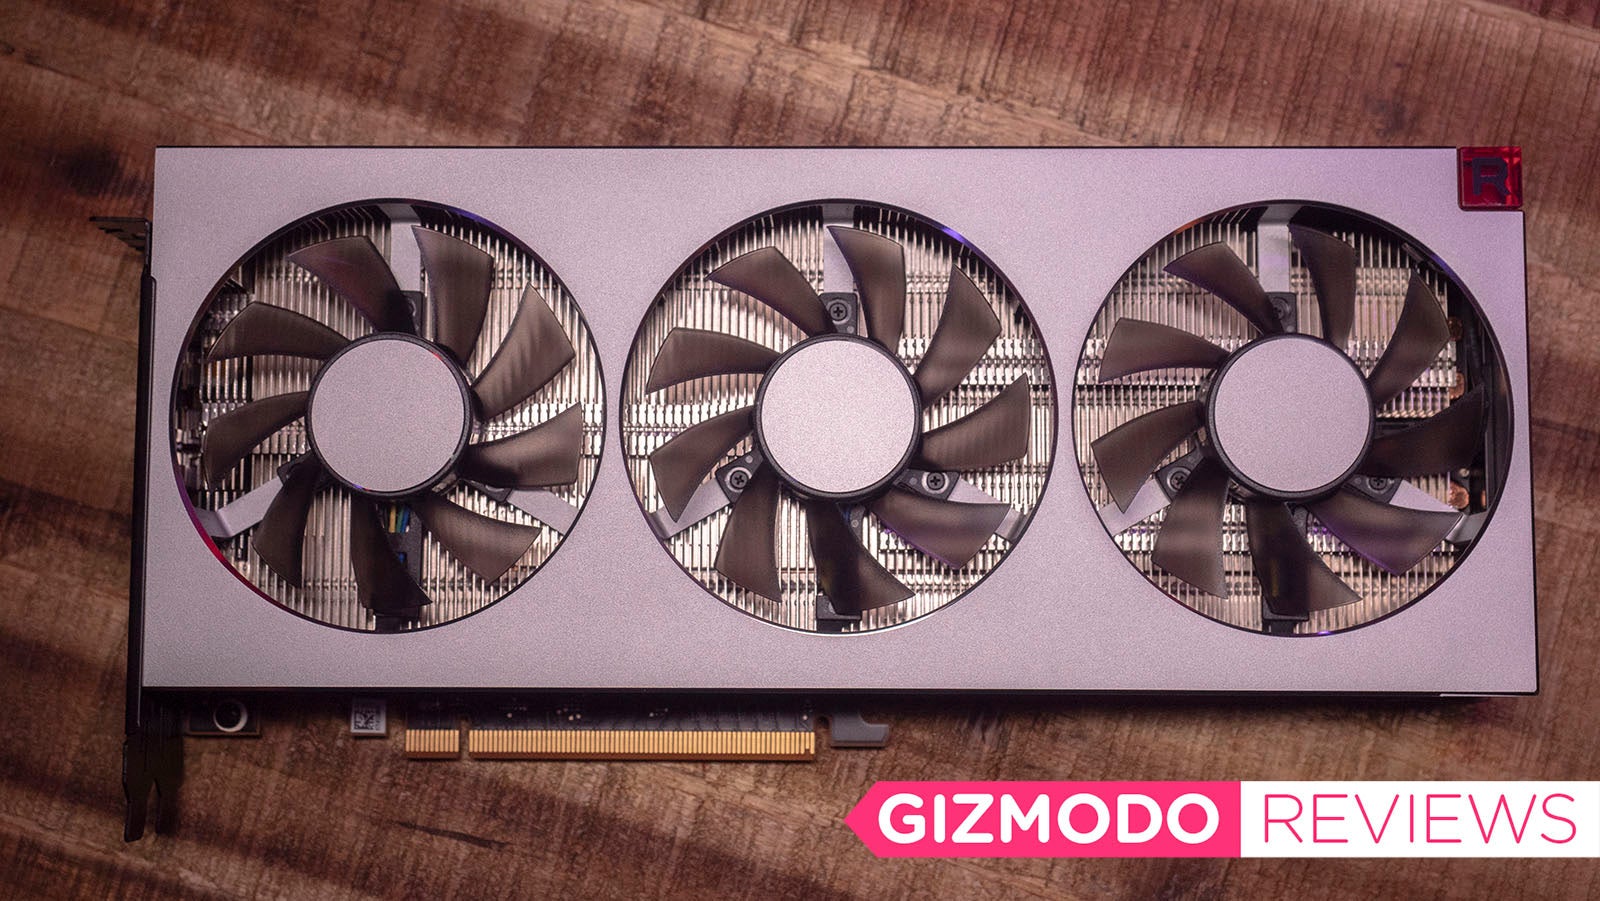 AMD’s Radeon VII Is a Great Gaming Card, But That’s Just the Beginning